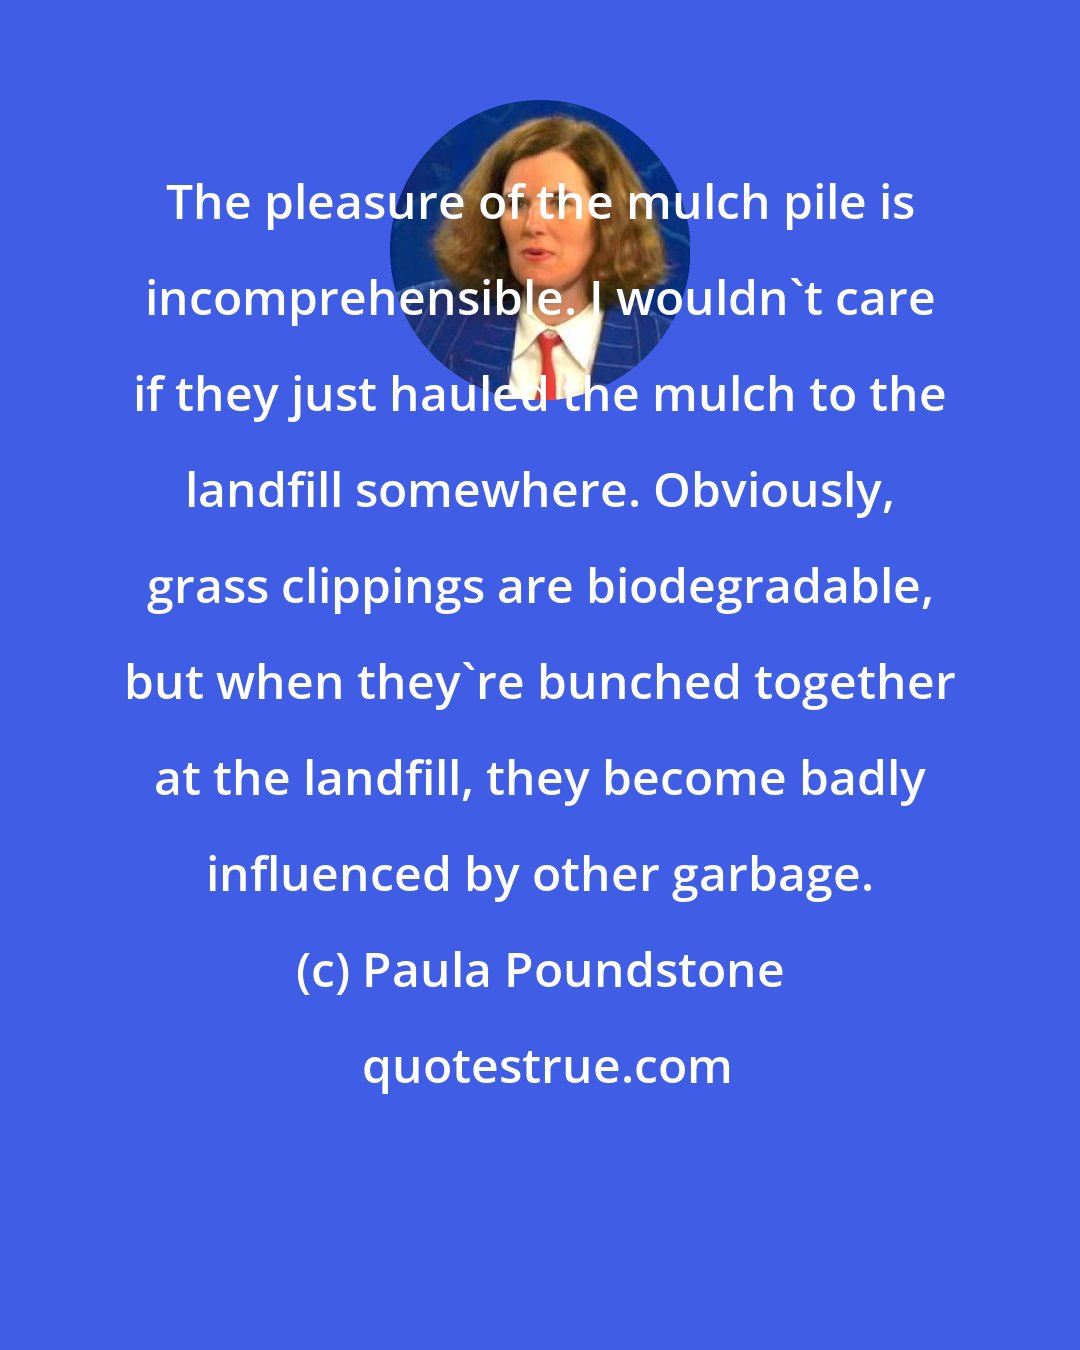 Paula Poundstone: The pleasure of the mulch pile is incomprehensible. I wouldn't care if they just hauled the mulch to the landfill somewhere. Obviously, grass clippings are biodegradable, but when they're bunched together at the landfill, they become badly influenced by other garbage.